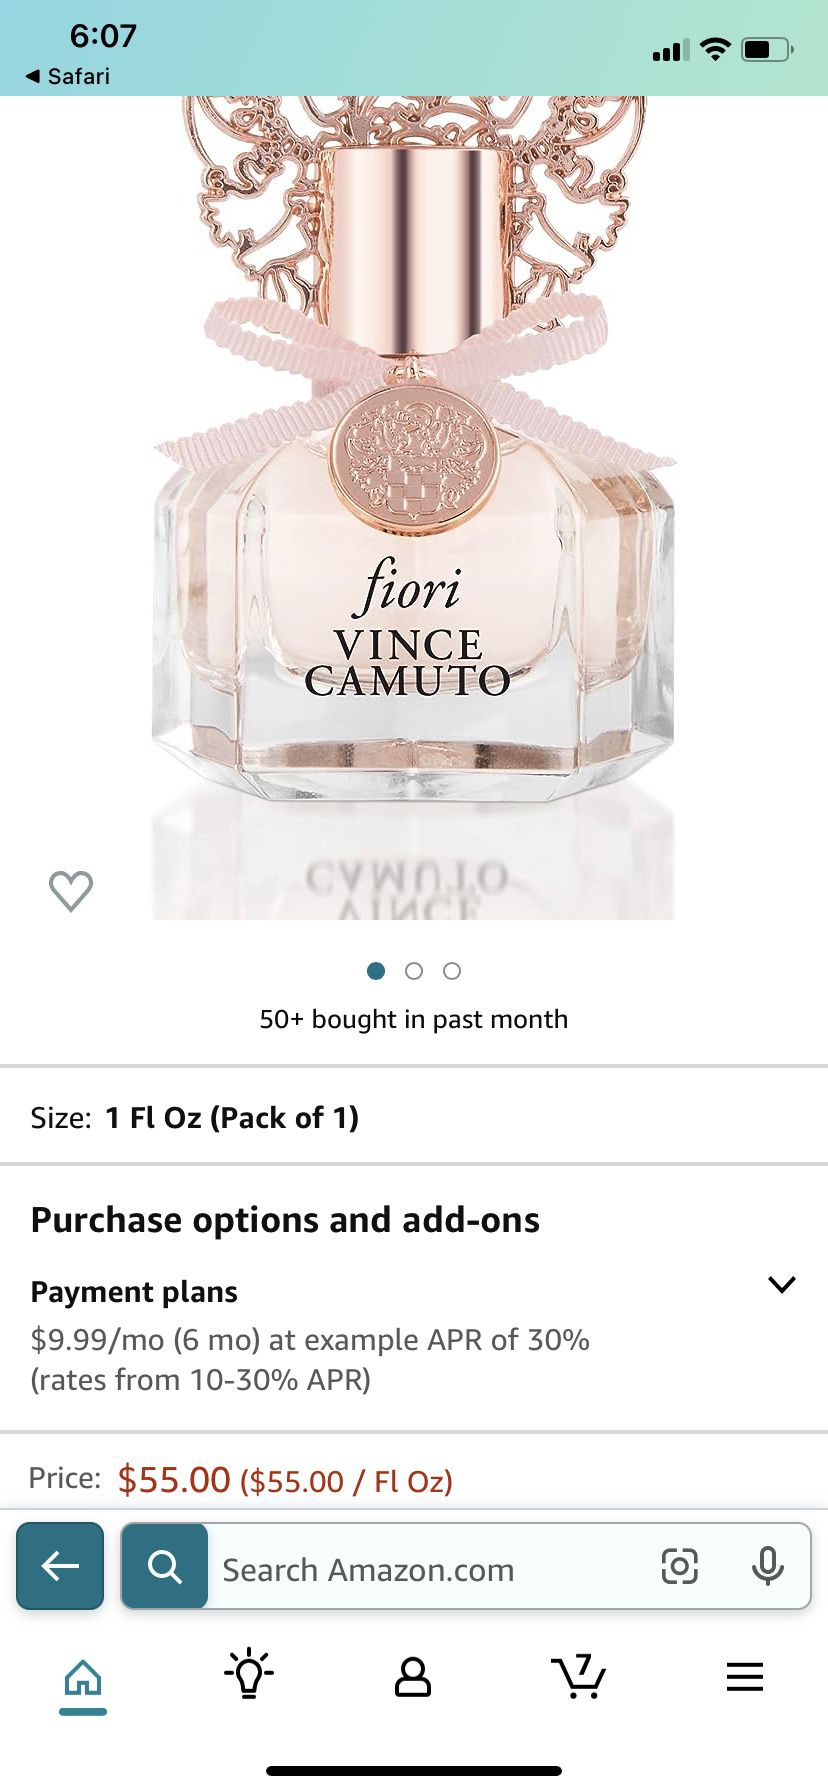 Vince Camuto Fiori for Women 1 oz. Eau de Parfum Spray by Vince Camuto for  Sale in Hillsboro, MO - OfferUp